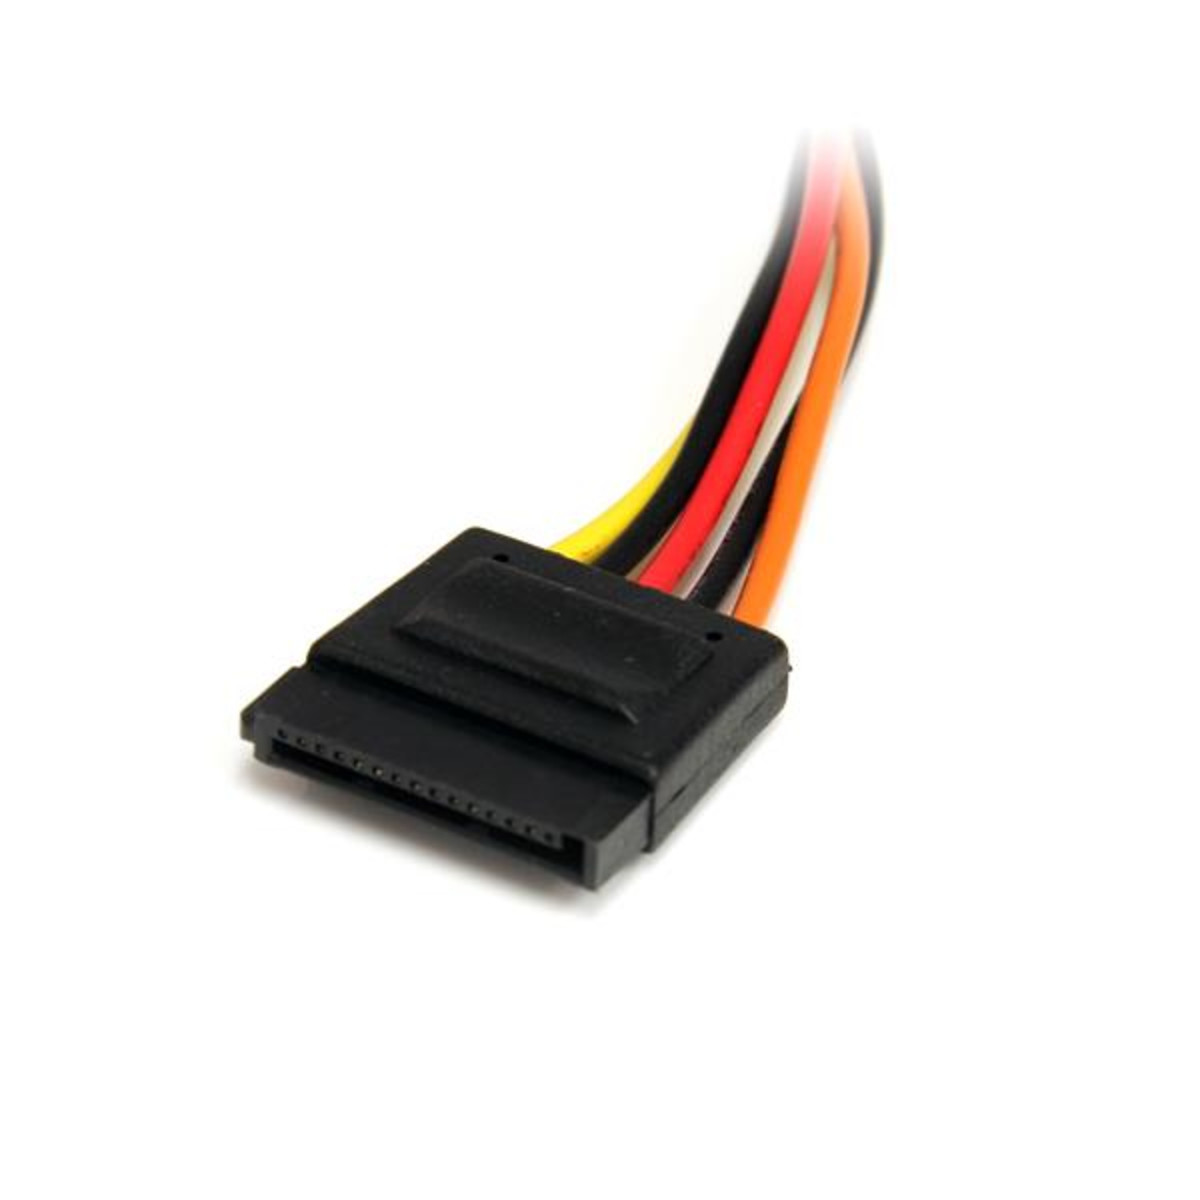 12in 15 pin SATA Power Extension Cable